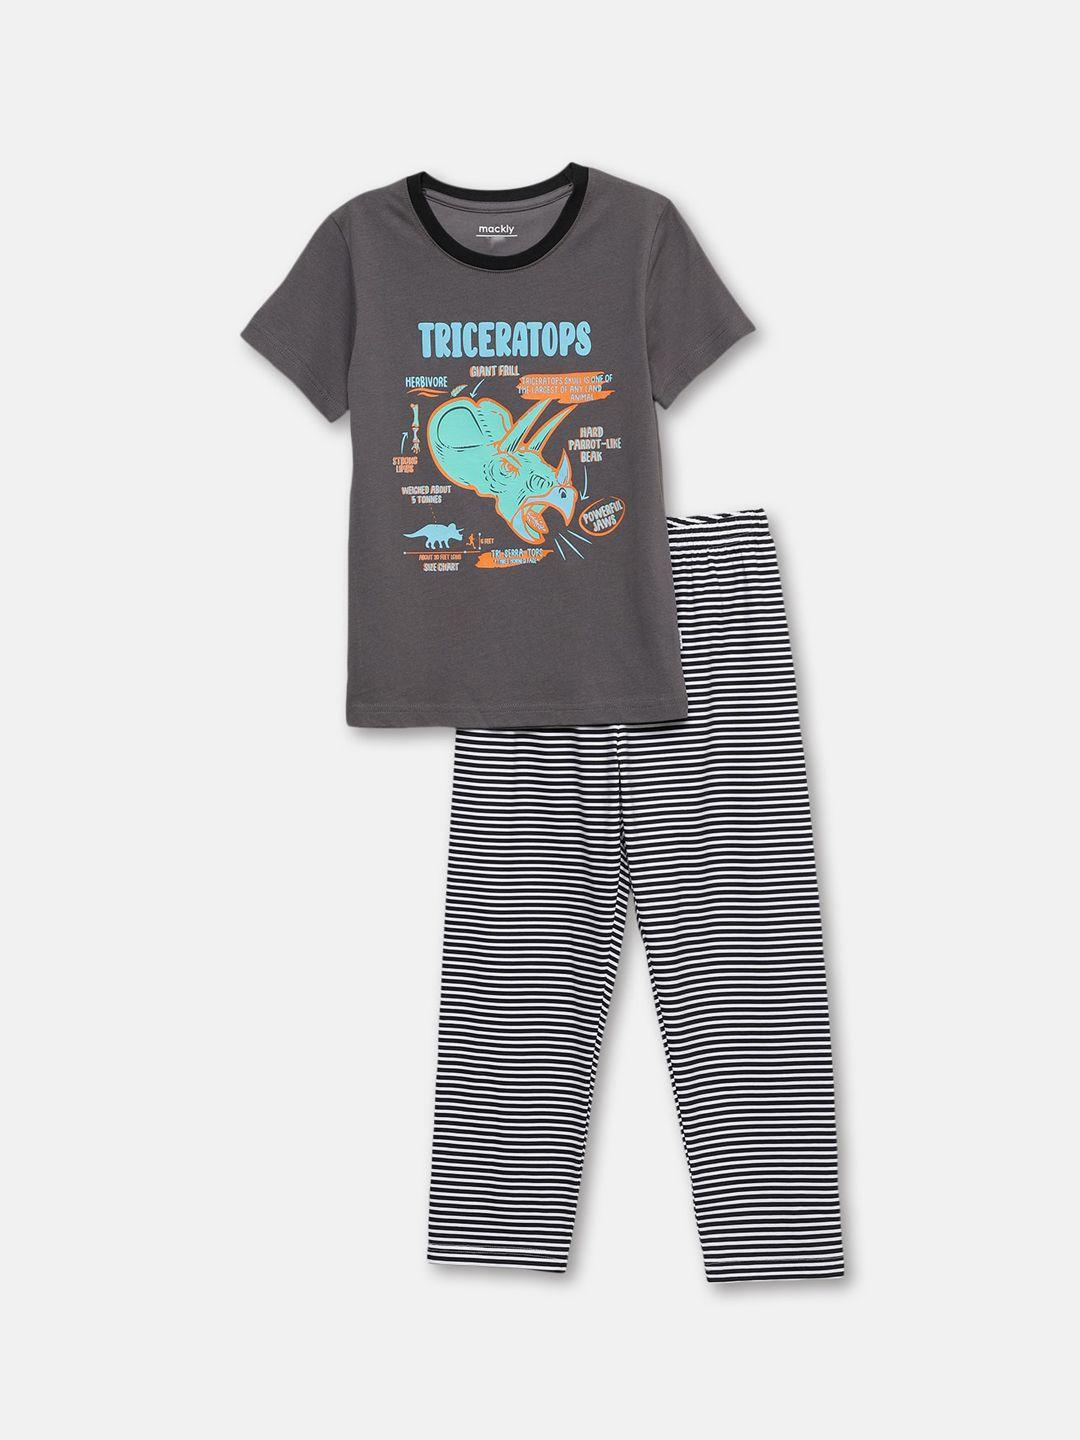 mackly boys graphic printed night suit